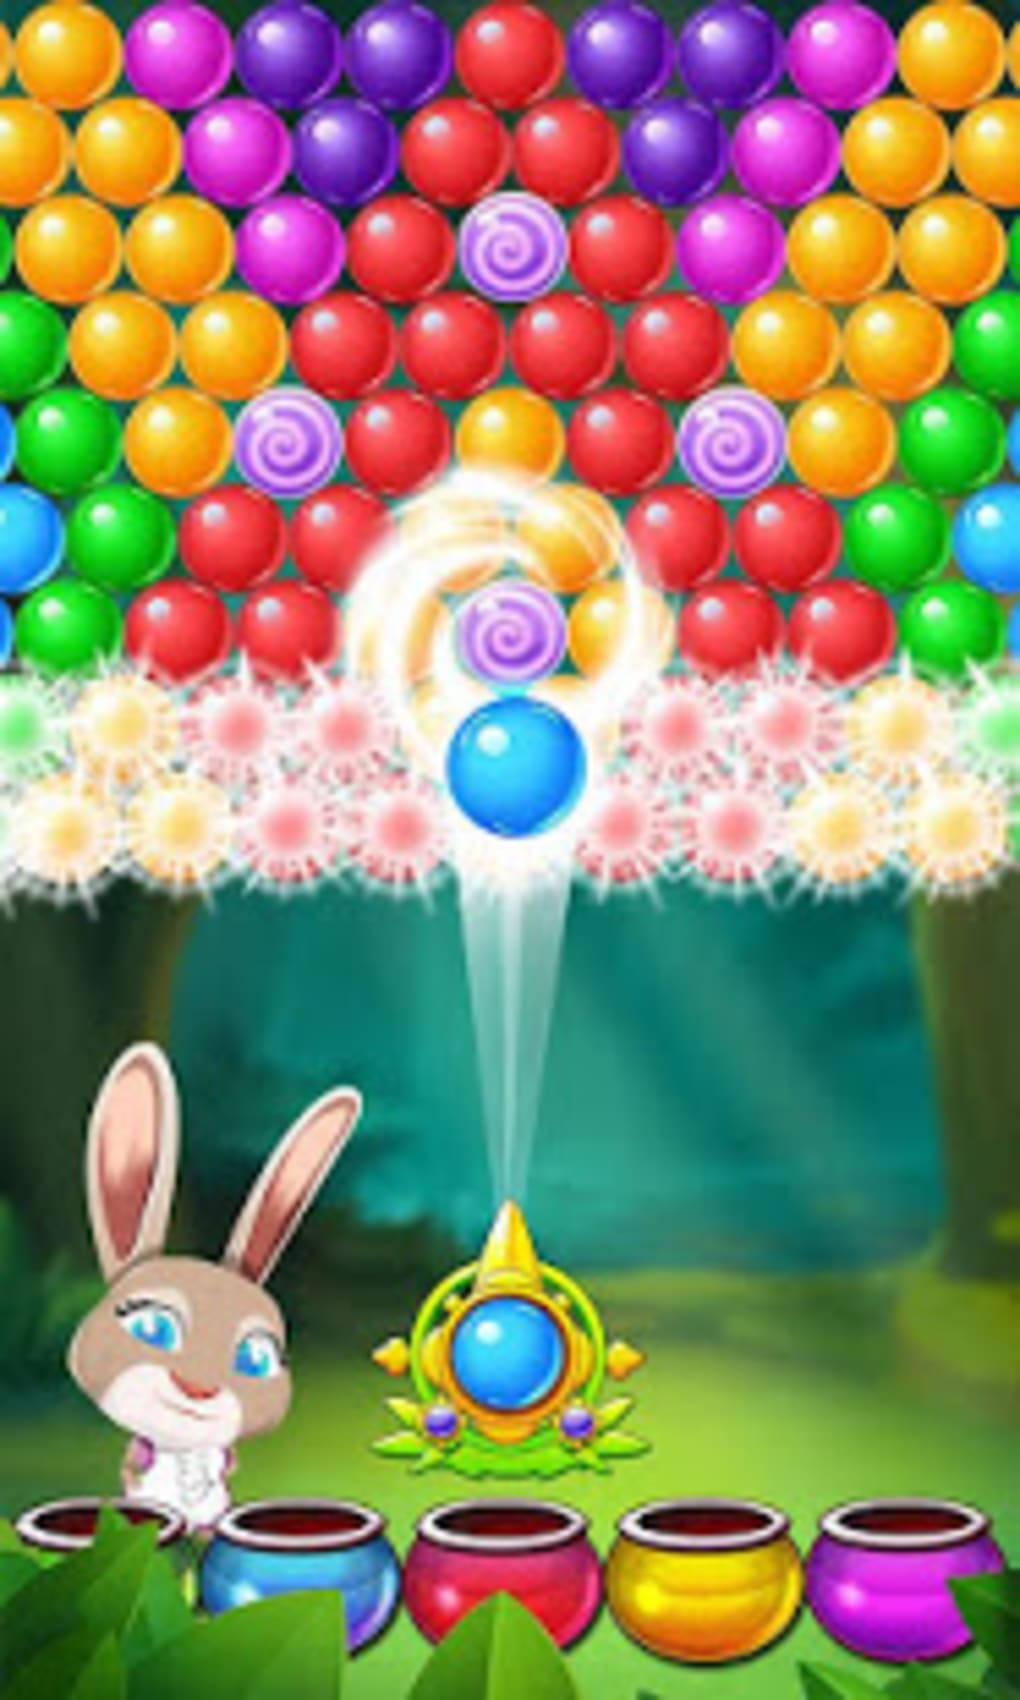 Bubble Shooter Legend - Apps on Google Play